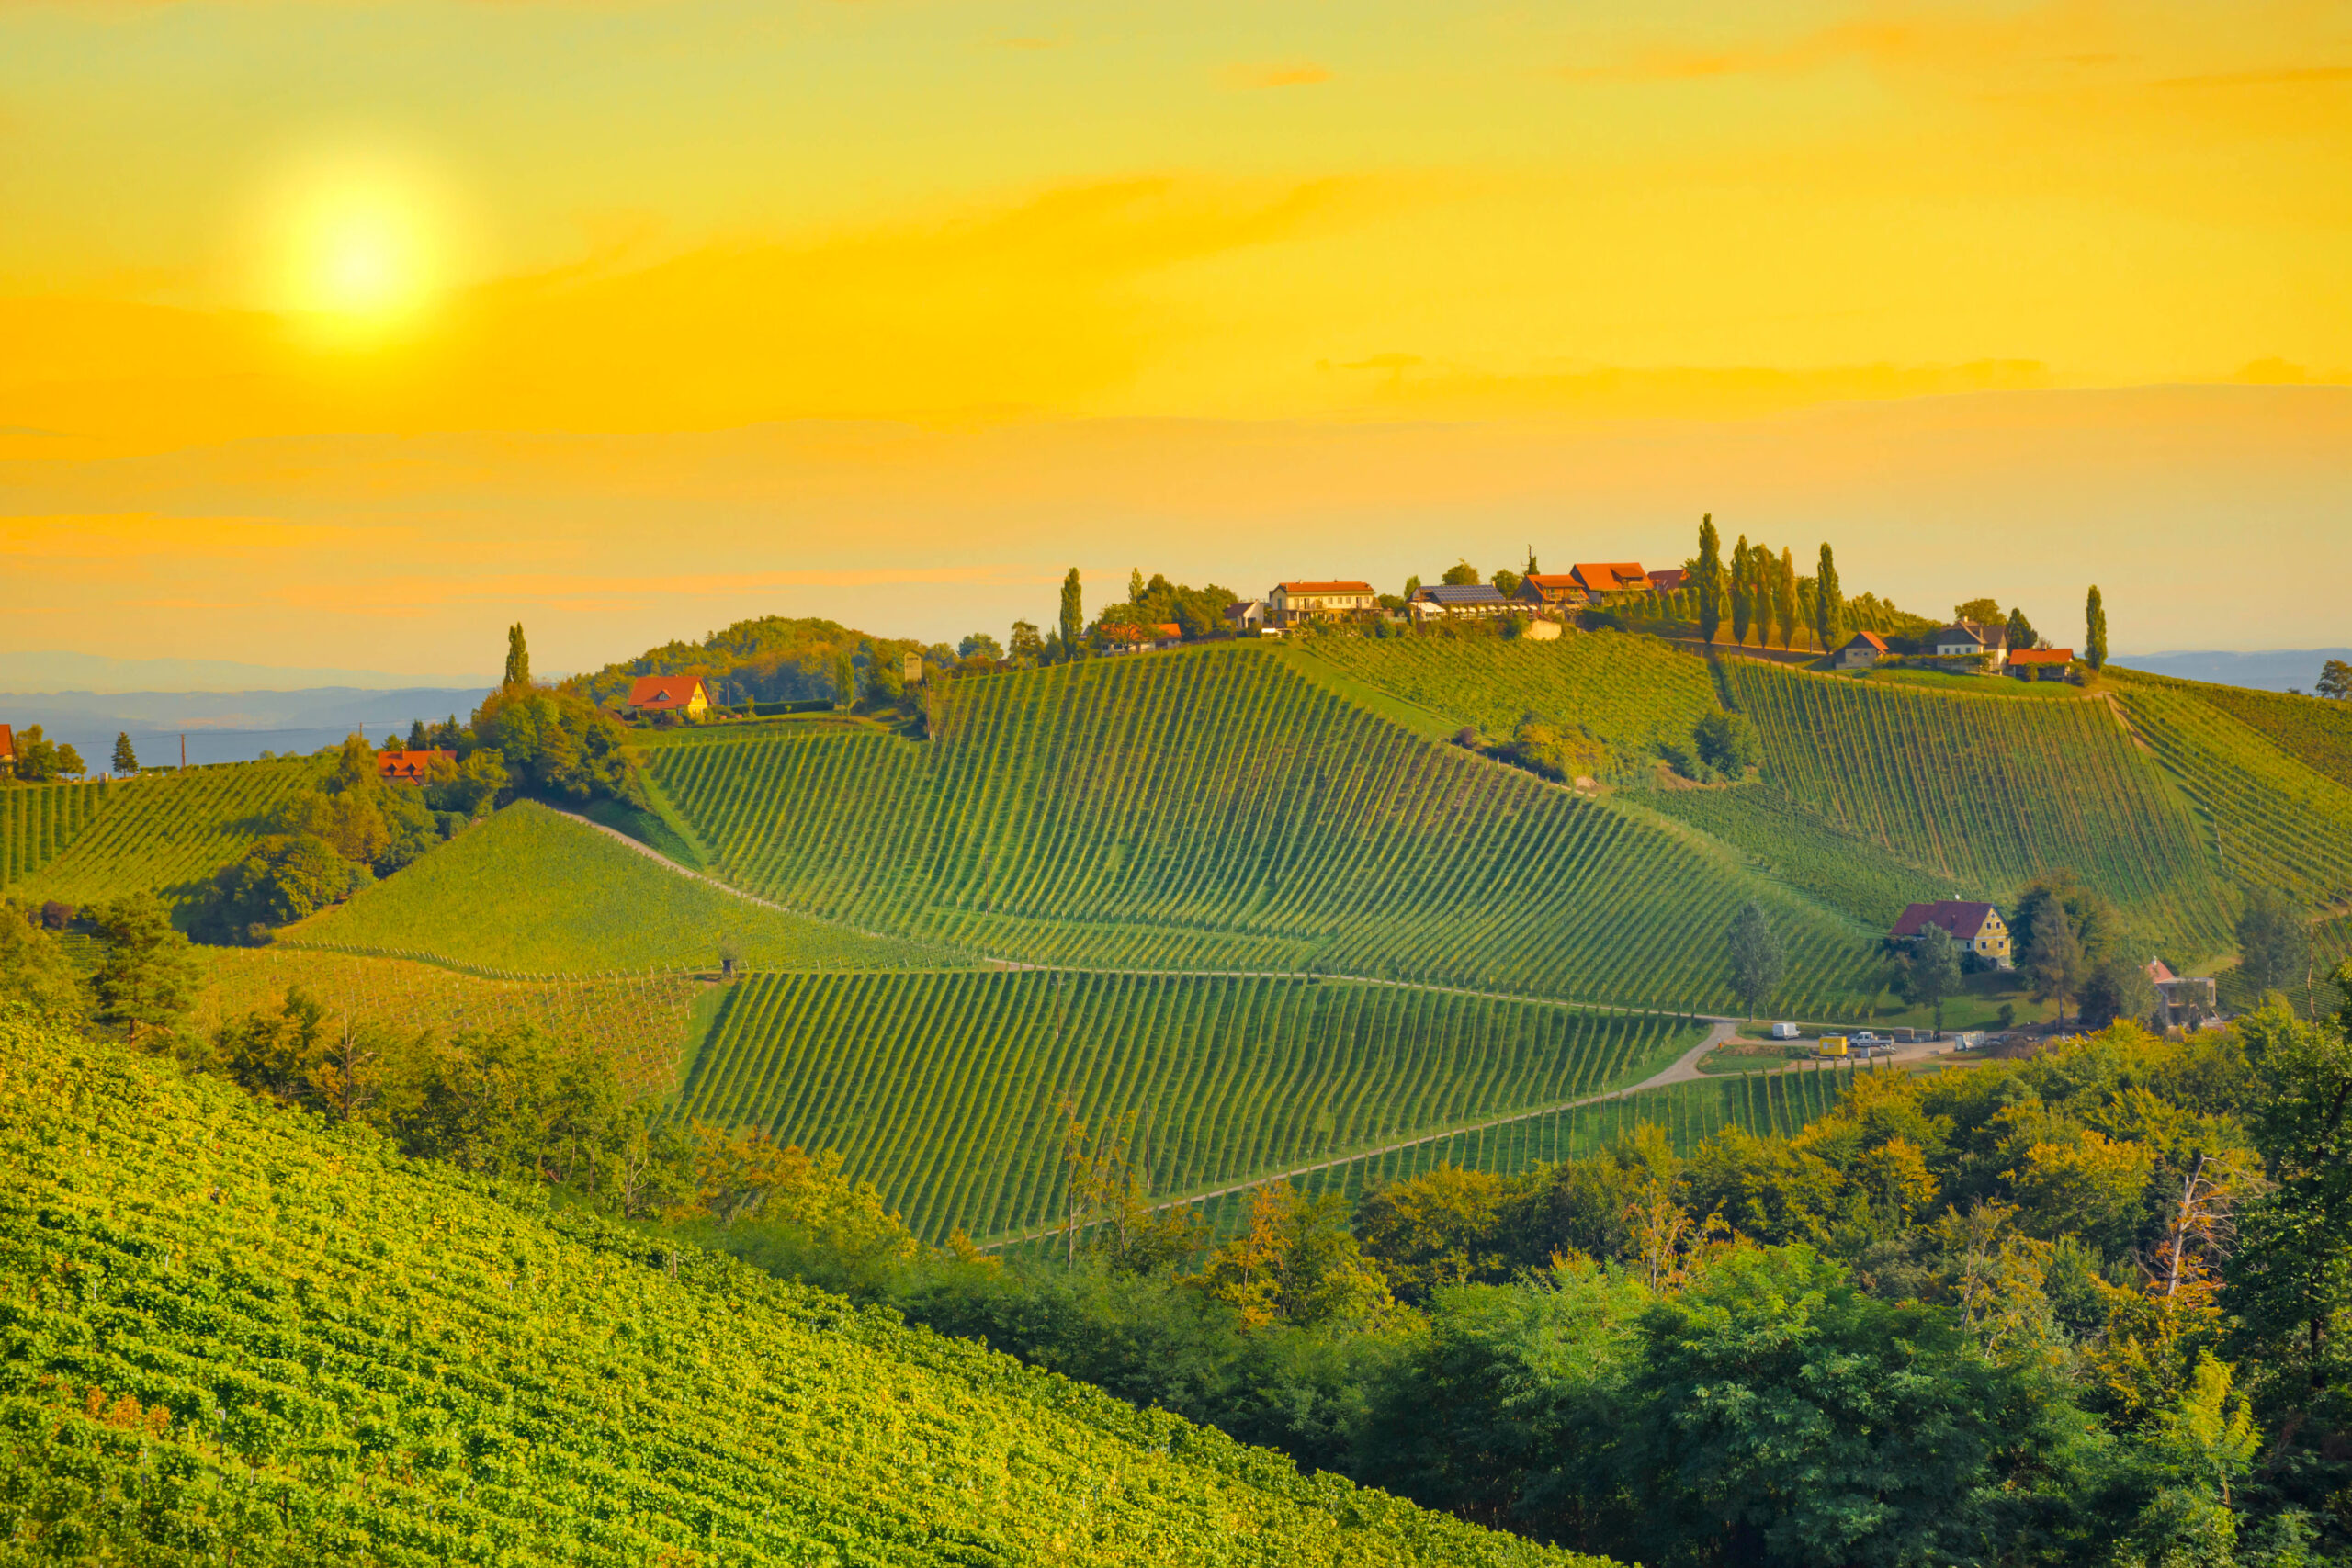 Vineyards along wine Road, a charming region with green rolling hills, vineyards, picturesque villages and wine taverns